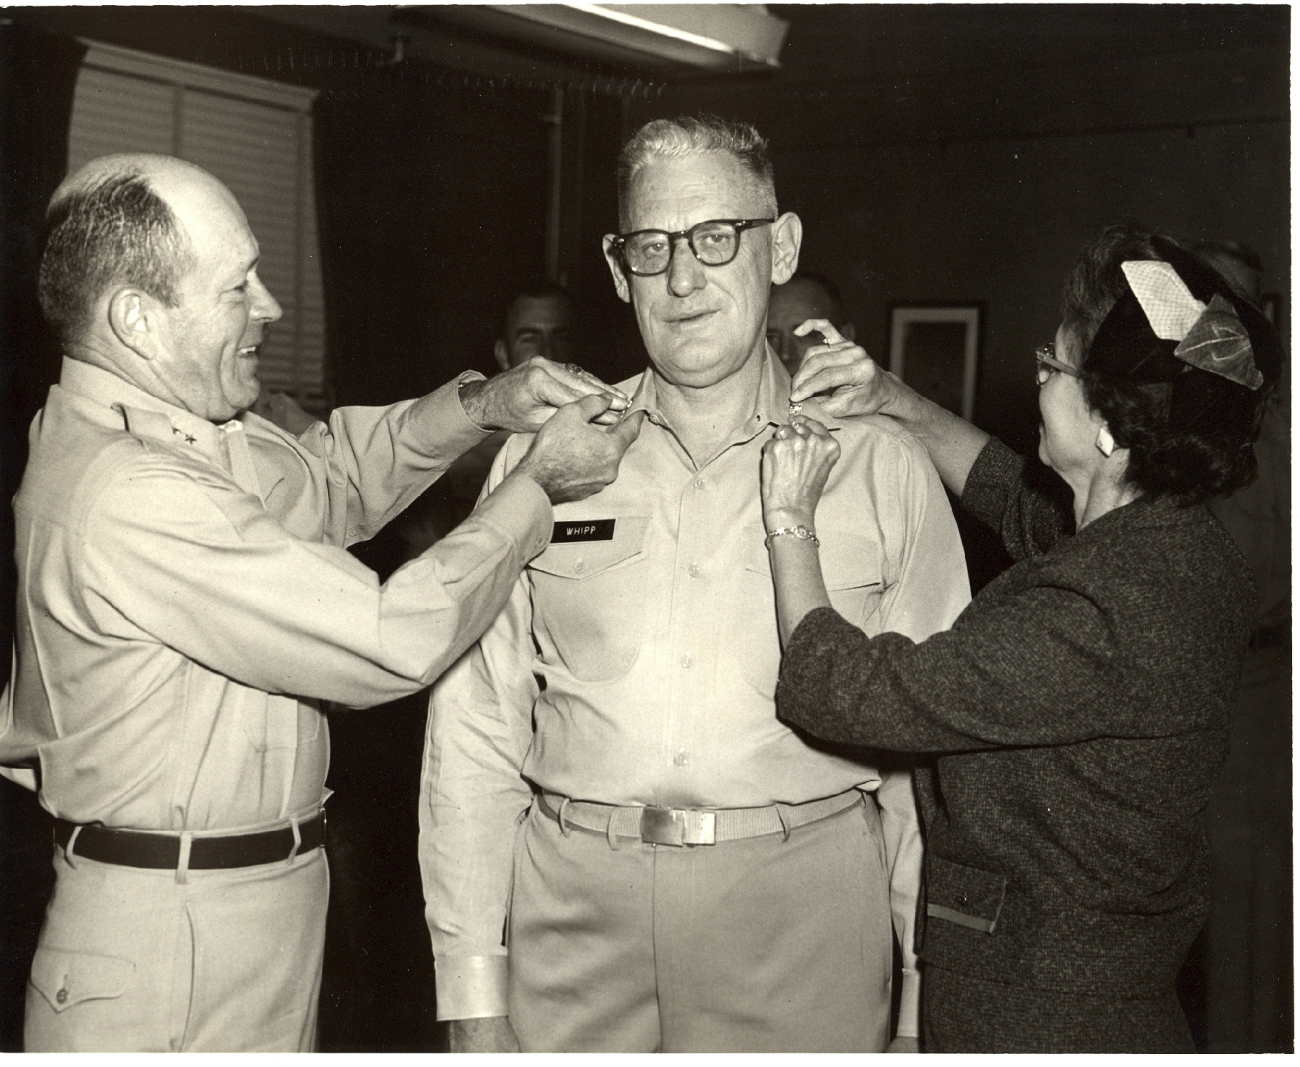 Captain David Whipp having his captain's eagles pinned on by Major General Harry H